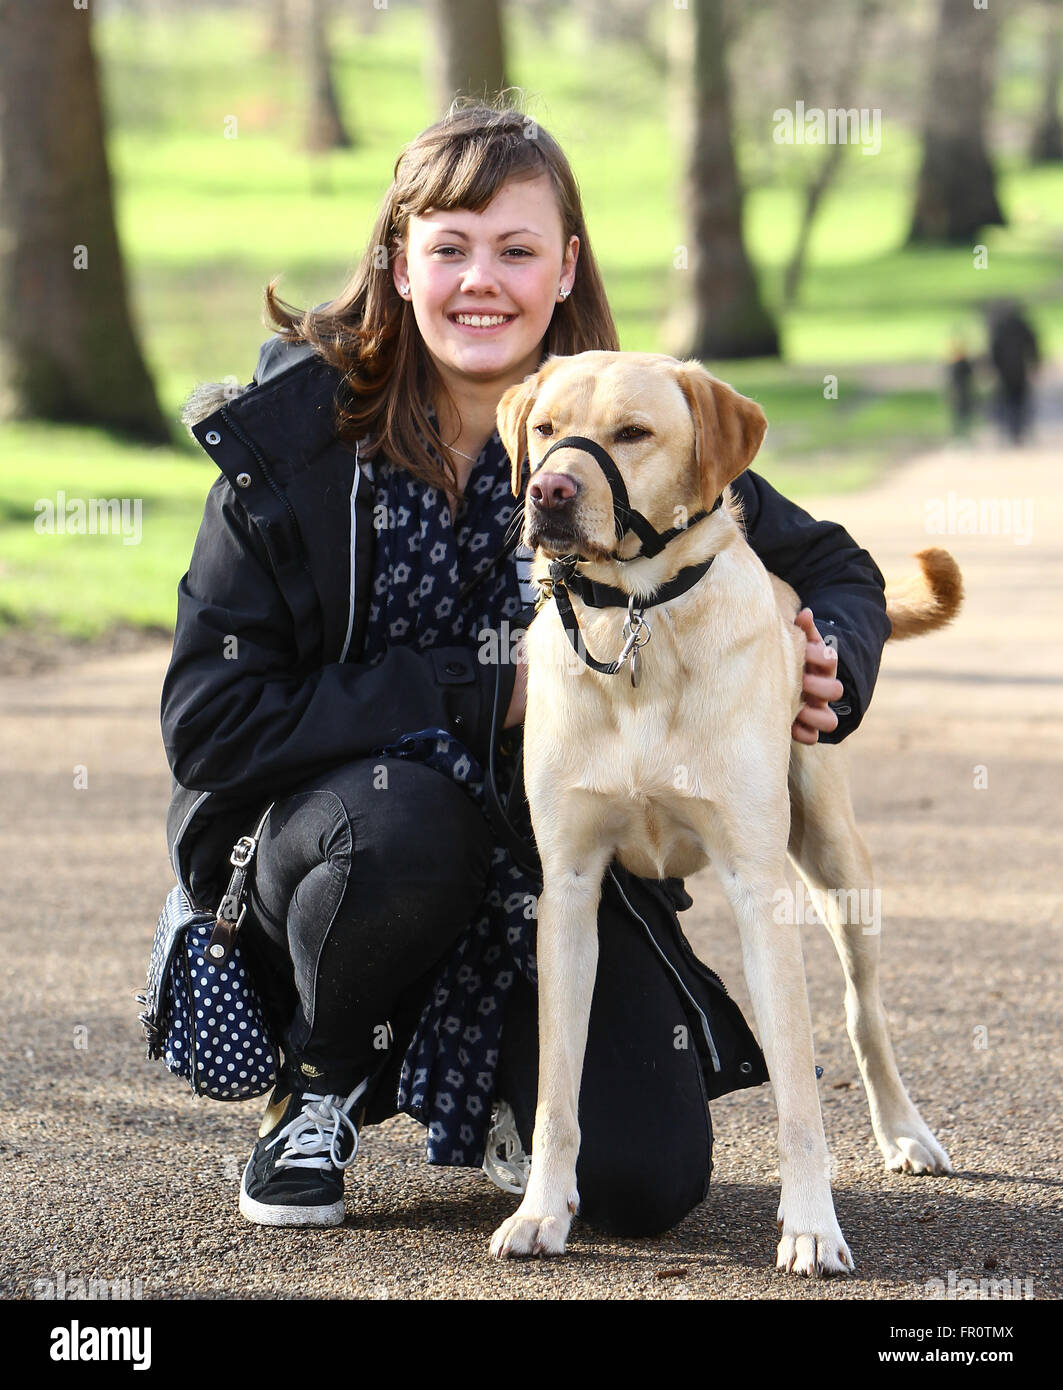 Photocall with the nominees for Crufts 2016 Dog Hero. The winner will be announced at Crufts, held at Birmingham's NEC Arena on 13 March (16).  Featuring: Sophie Pearman, Scooby Where: London, United Kingdom When: 18 Feb 2016 Stock Photo